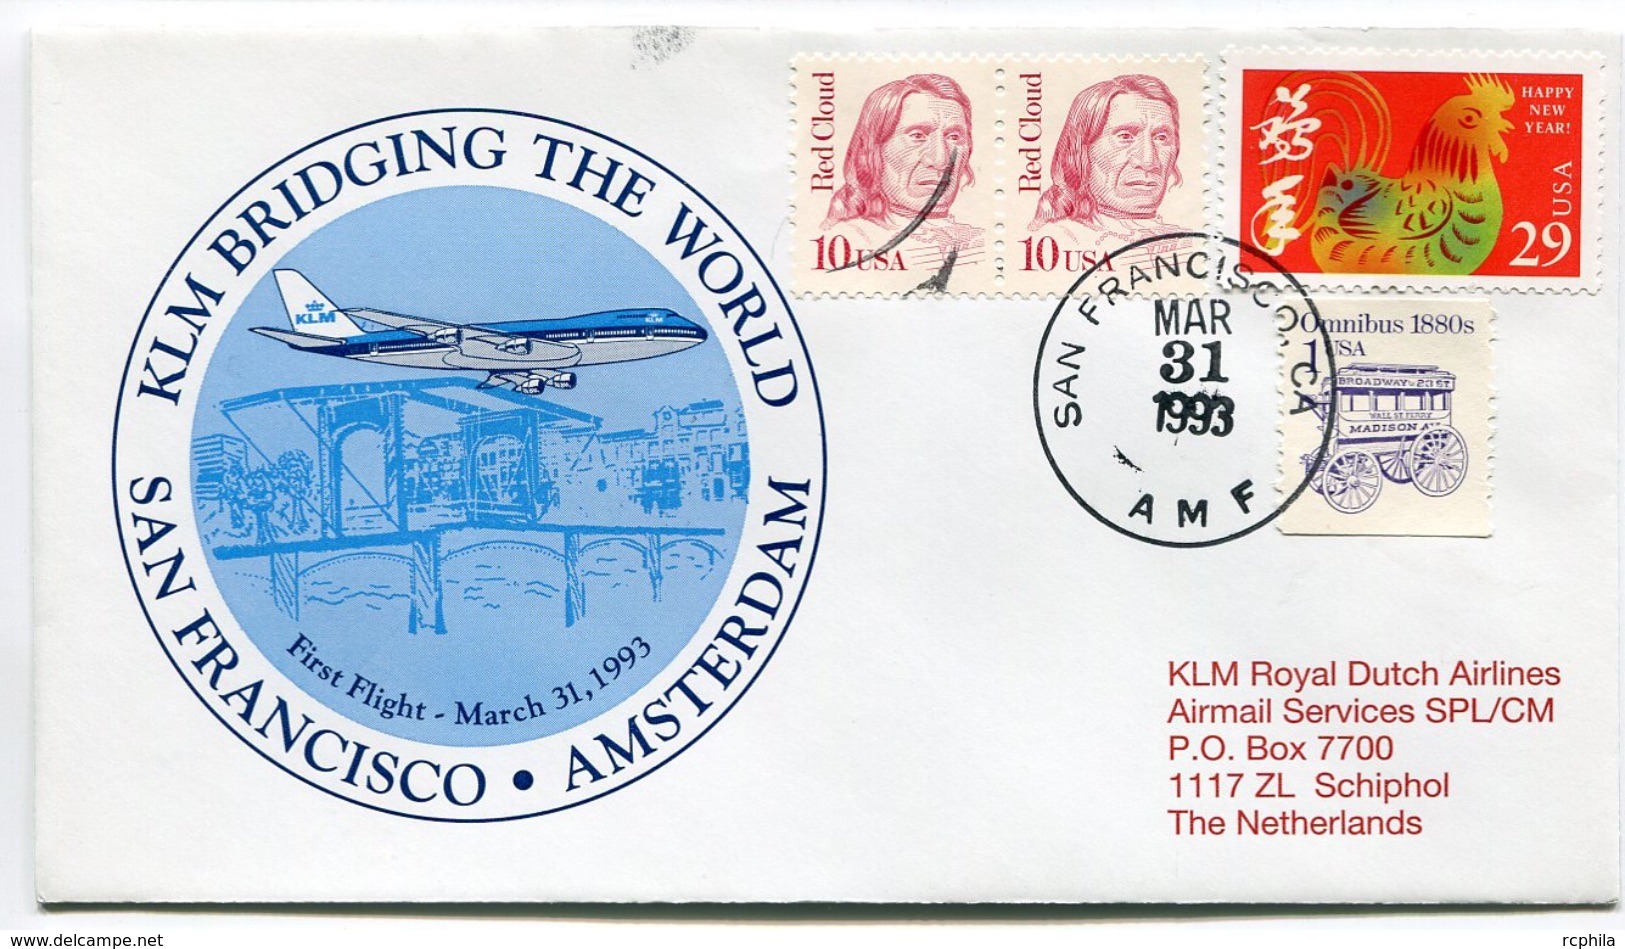 RC 6694 PAYS-BAS KLM 1993 1er VOL SAN FRANCISCO USA - AMSTERDAM FFC NETHERLANDS LETTRE COVER - Airmail